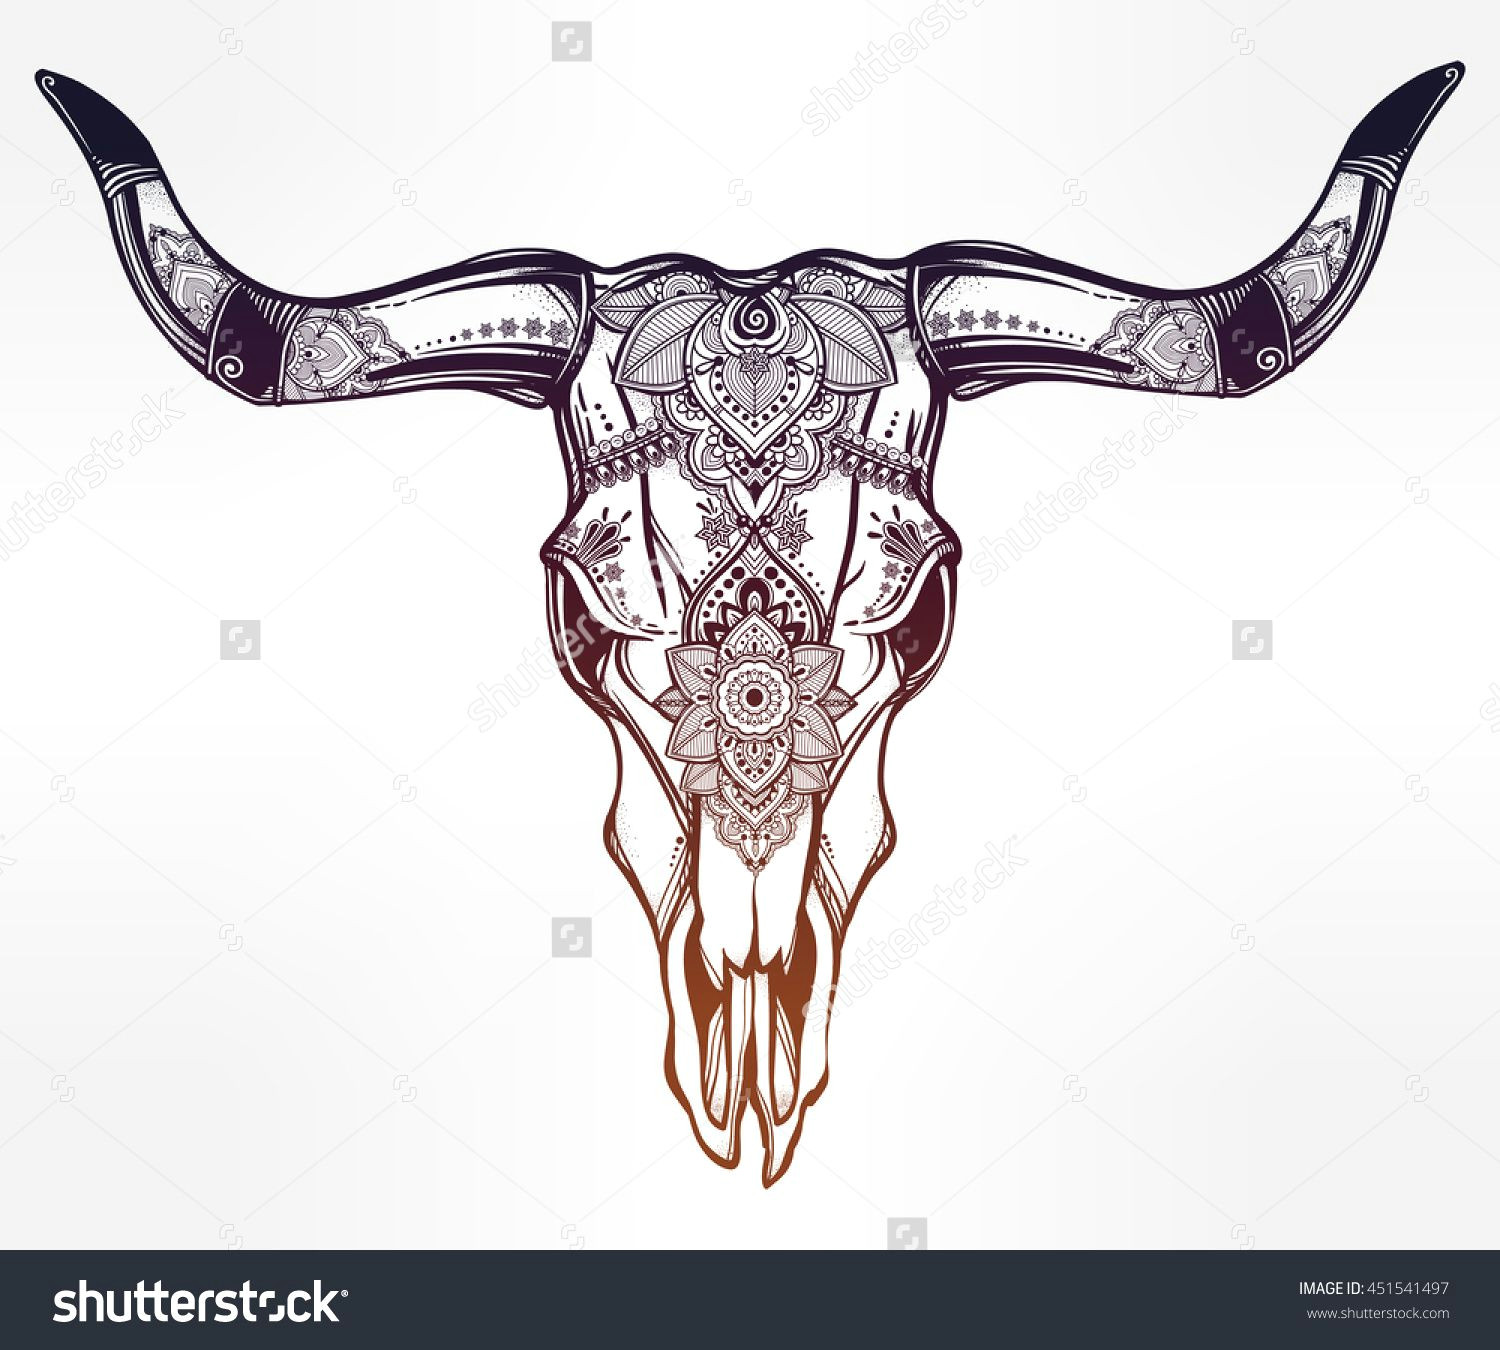 Drawing Cow Skulls Hand Drawn Romantic Tattoo Style ornate Decorative Desert Cow or